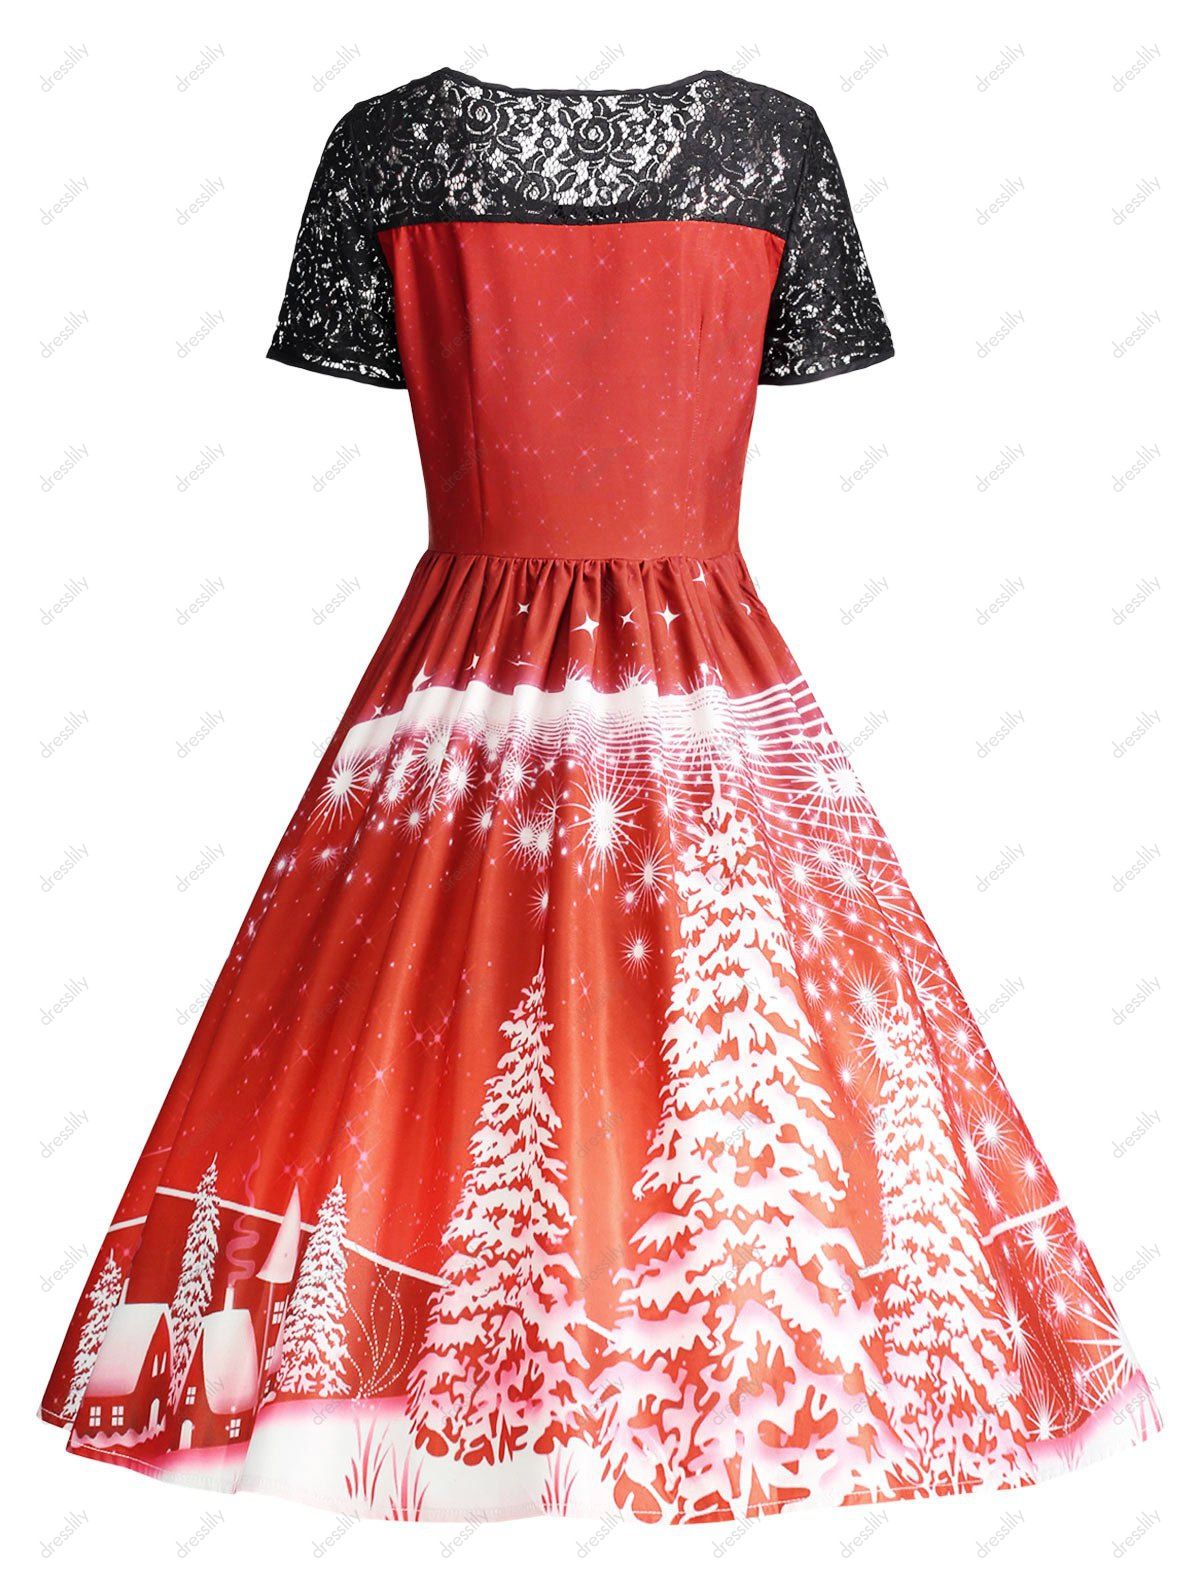 [71% OFF] 2021 Print Lace Panel Vintage Party Dress In RED | DressLily